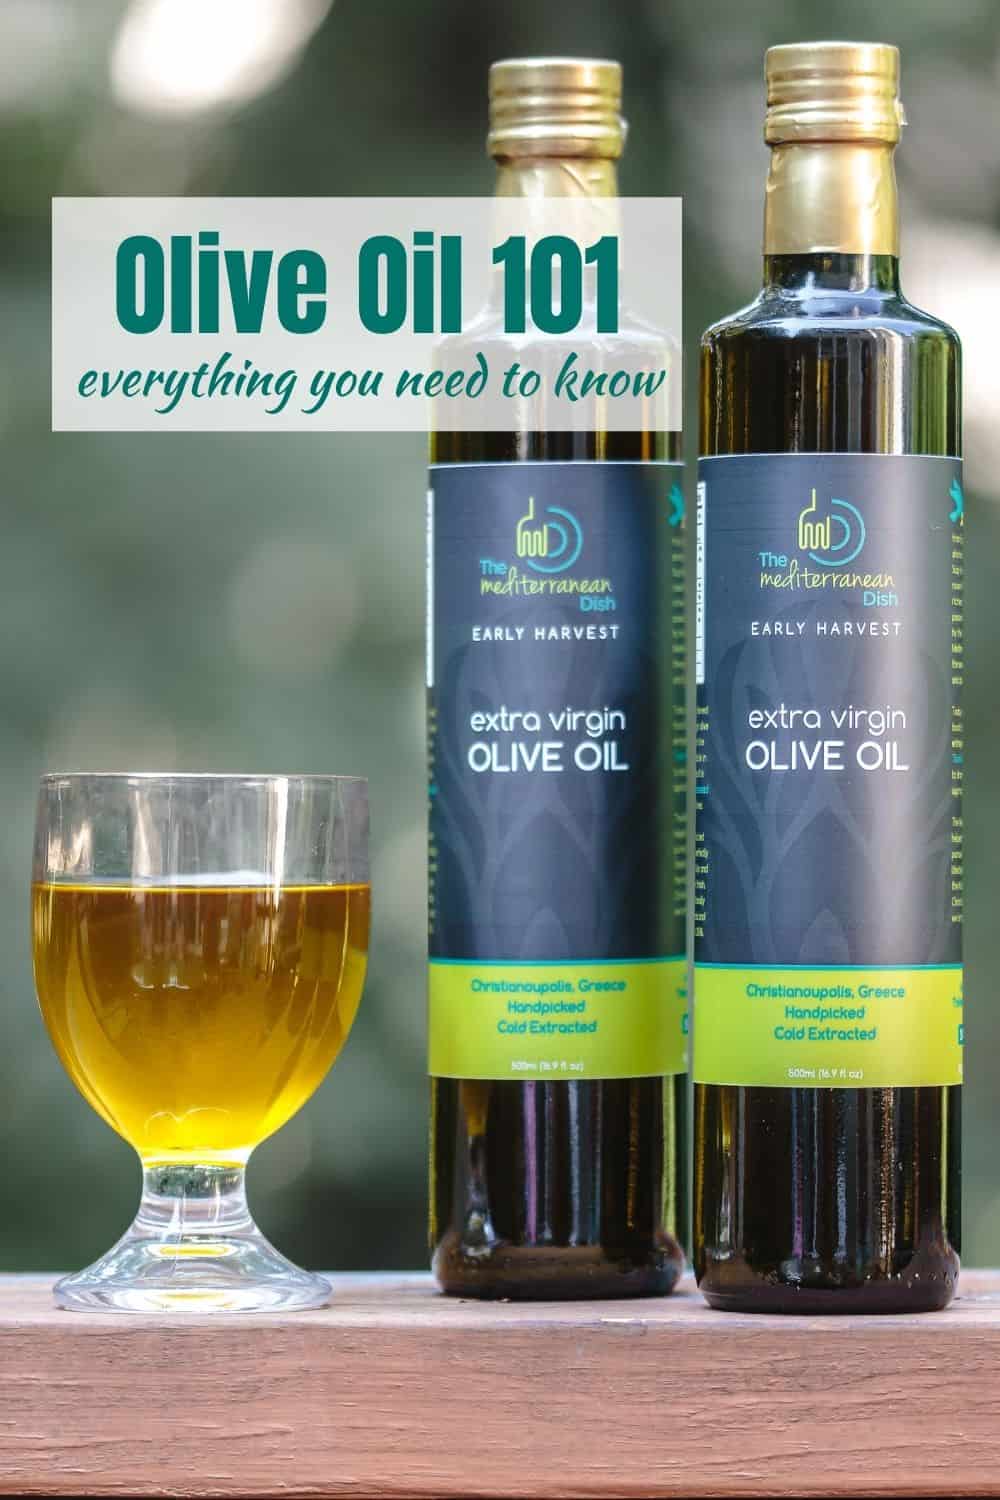 Olives 101: Nutrition Facts and Health Benefits